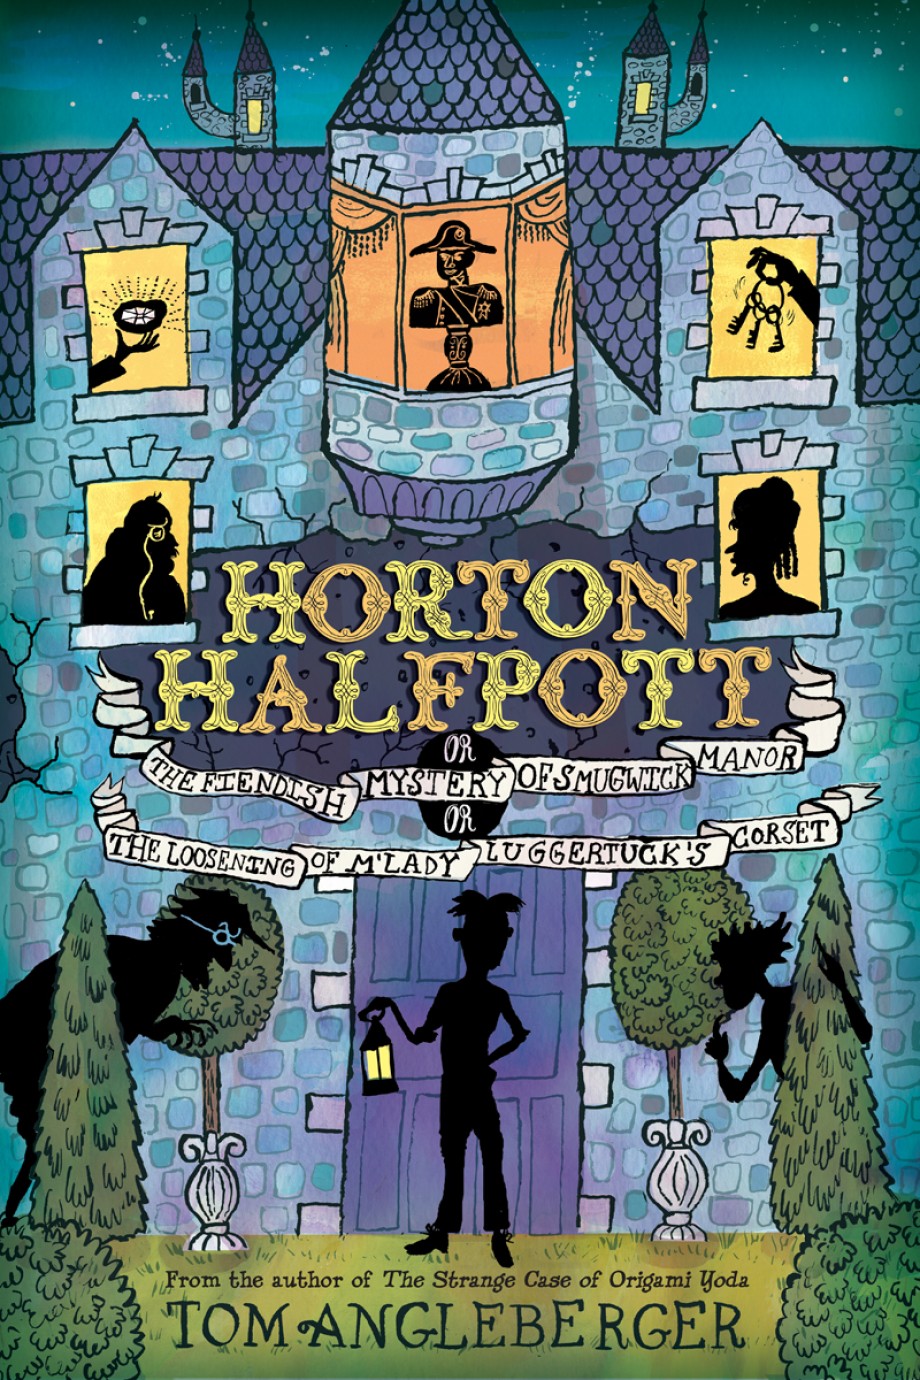 Horton Halfpott Or, The Fiendish Mystery of Smugwick Manor; or, The Loosening of M'Lady Luggertuck's Corset